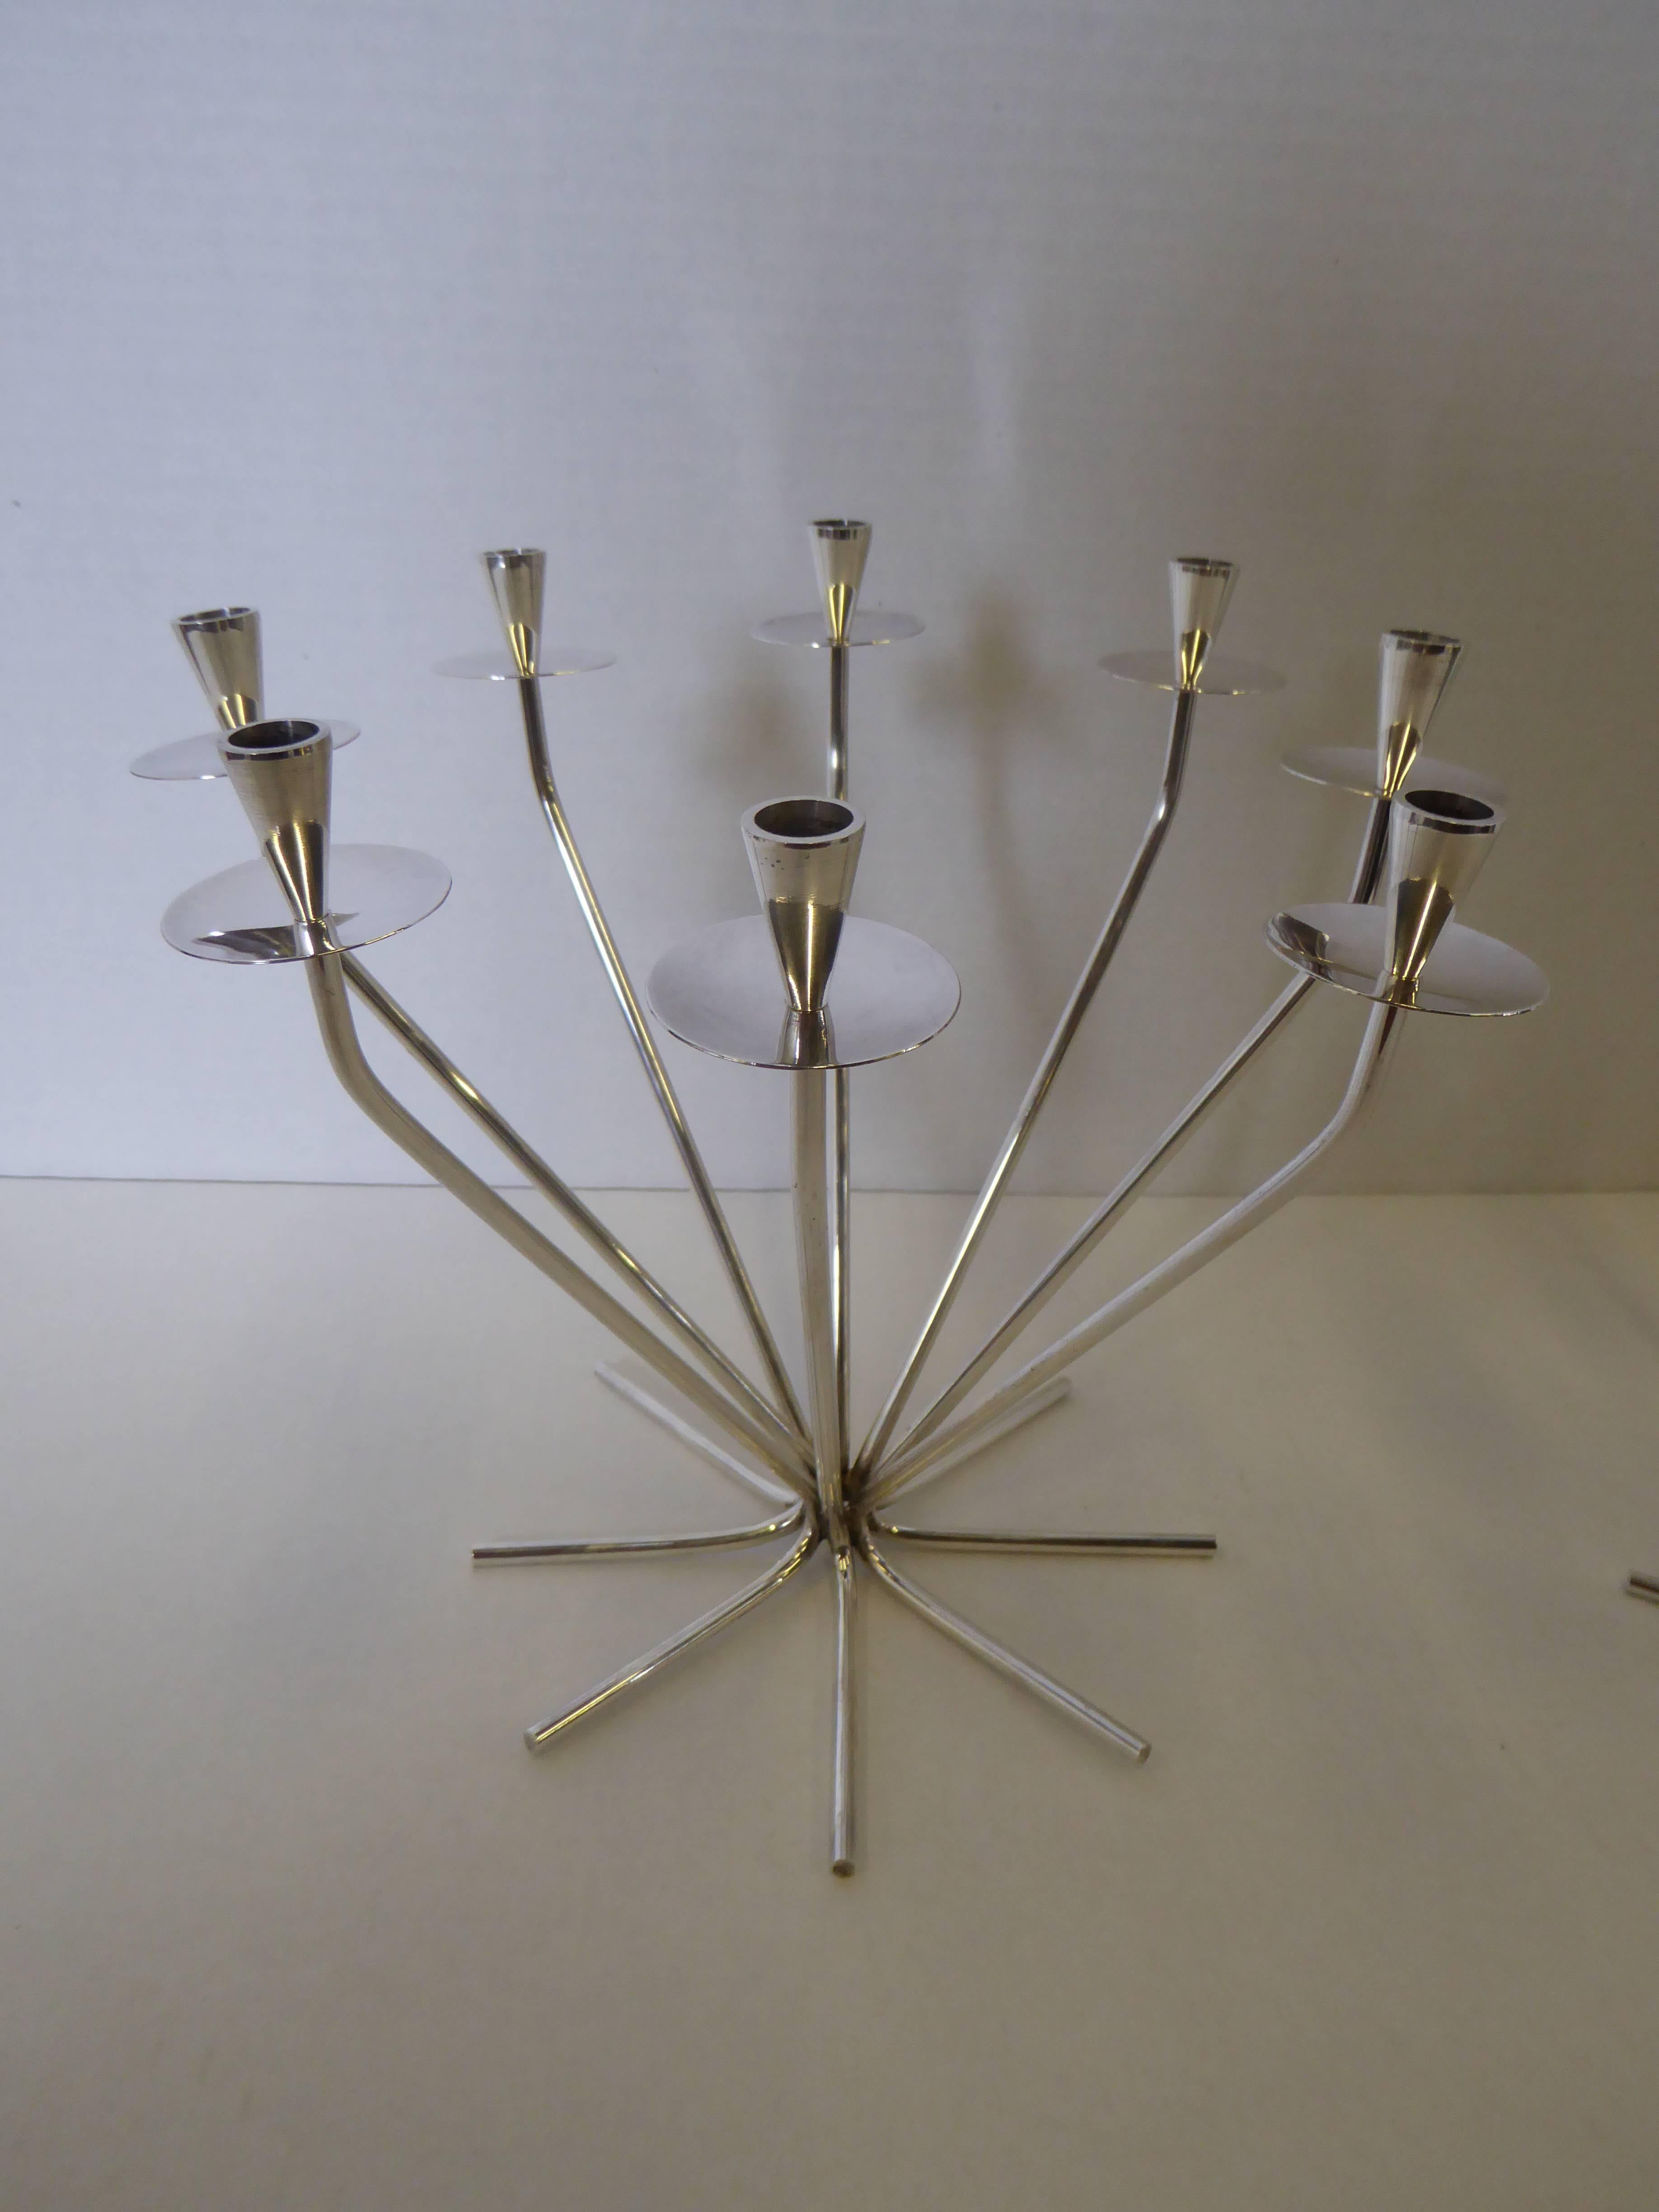 Sculptural pair of modernist candelabra with tubular starburst form rising to bobeches and conical candleholders. Silver plate. Eight candles each candelabra. Each signed in the metal foot E. Dragsted 12 Denmark.
Einar Dragsted (1887-1967) Purveyor